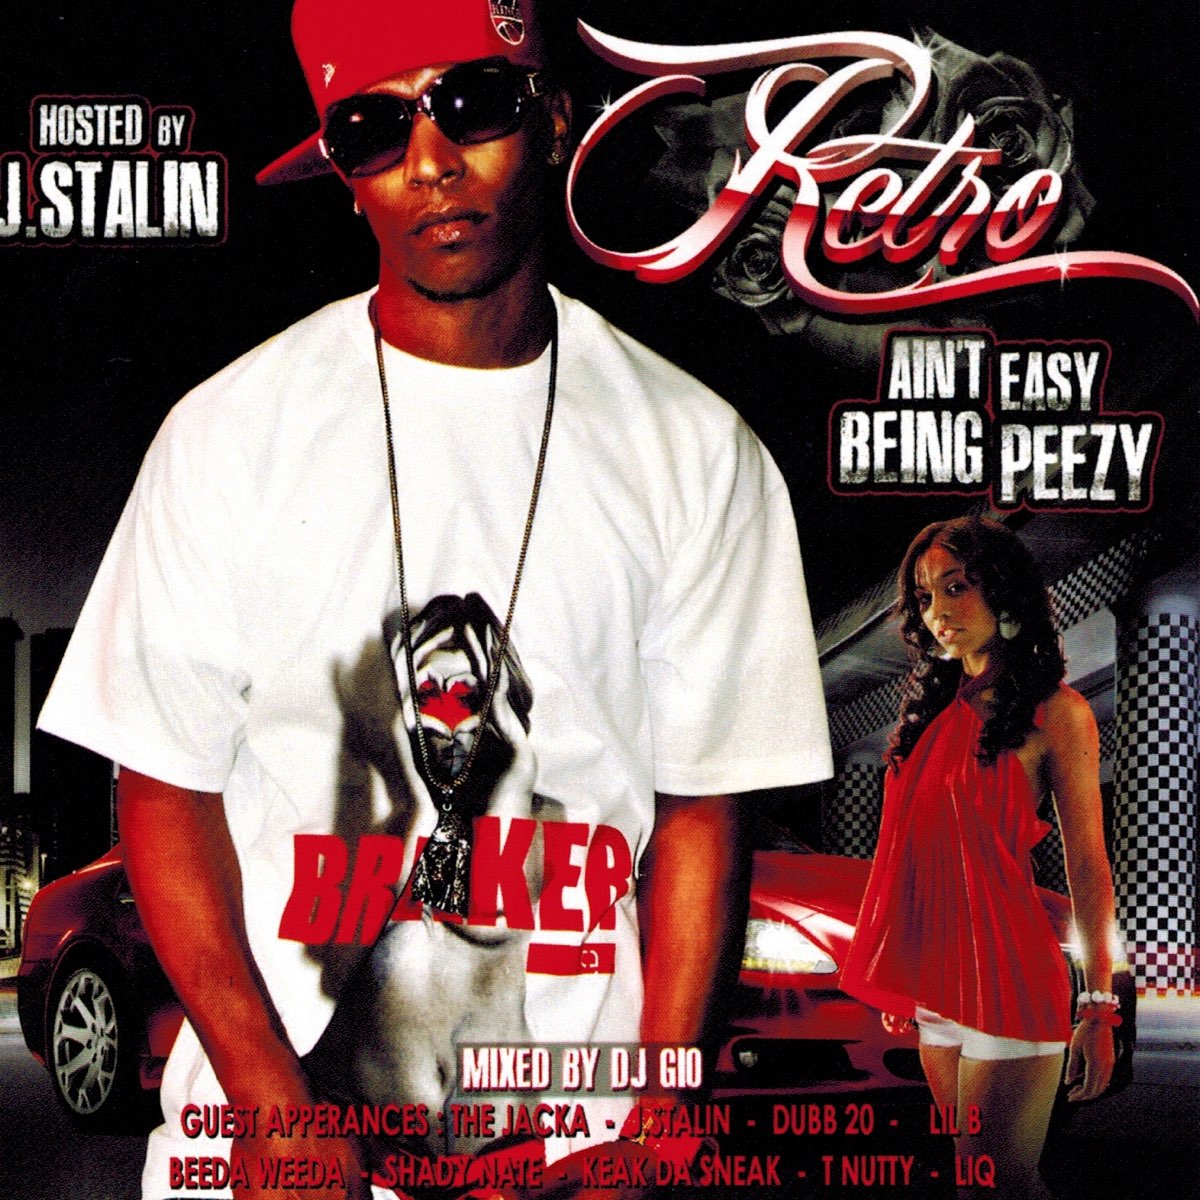 Retro - Ain't Easy Being Peezy Hosted By J. Stalin